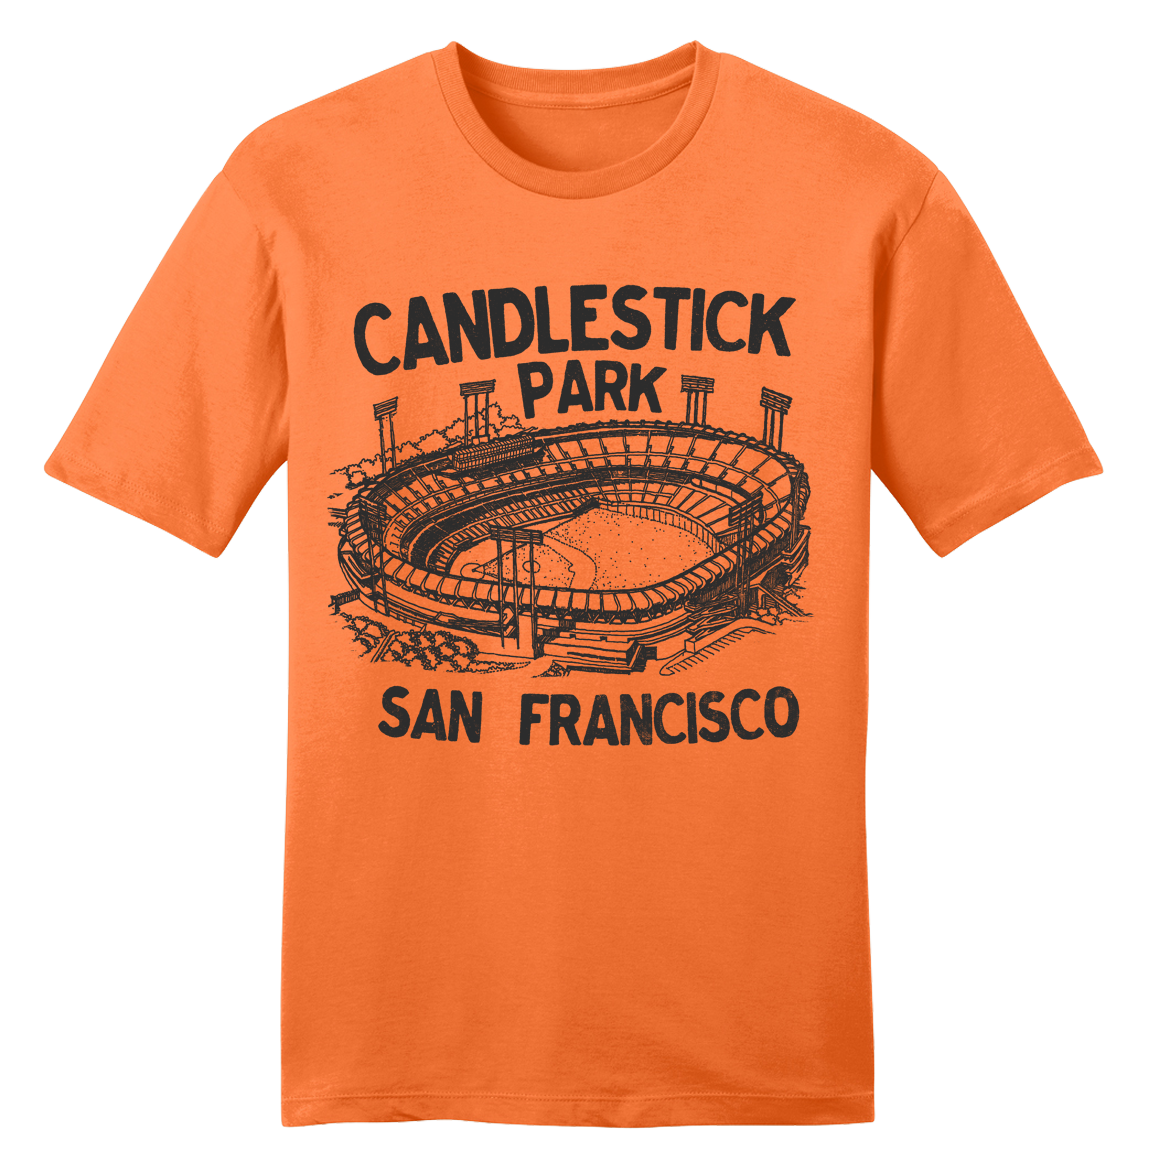 Candlestick Park Classic tee